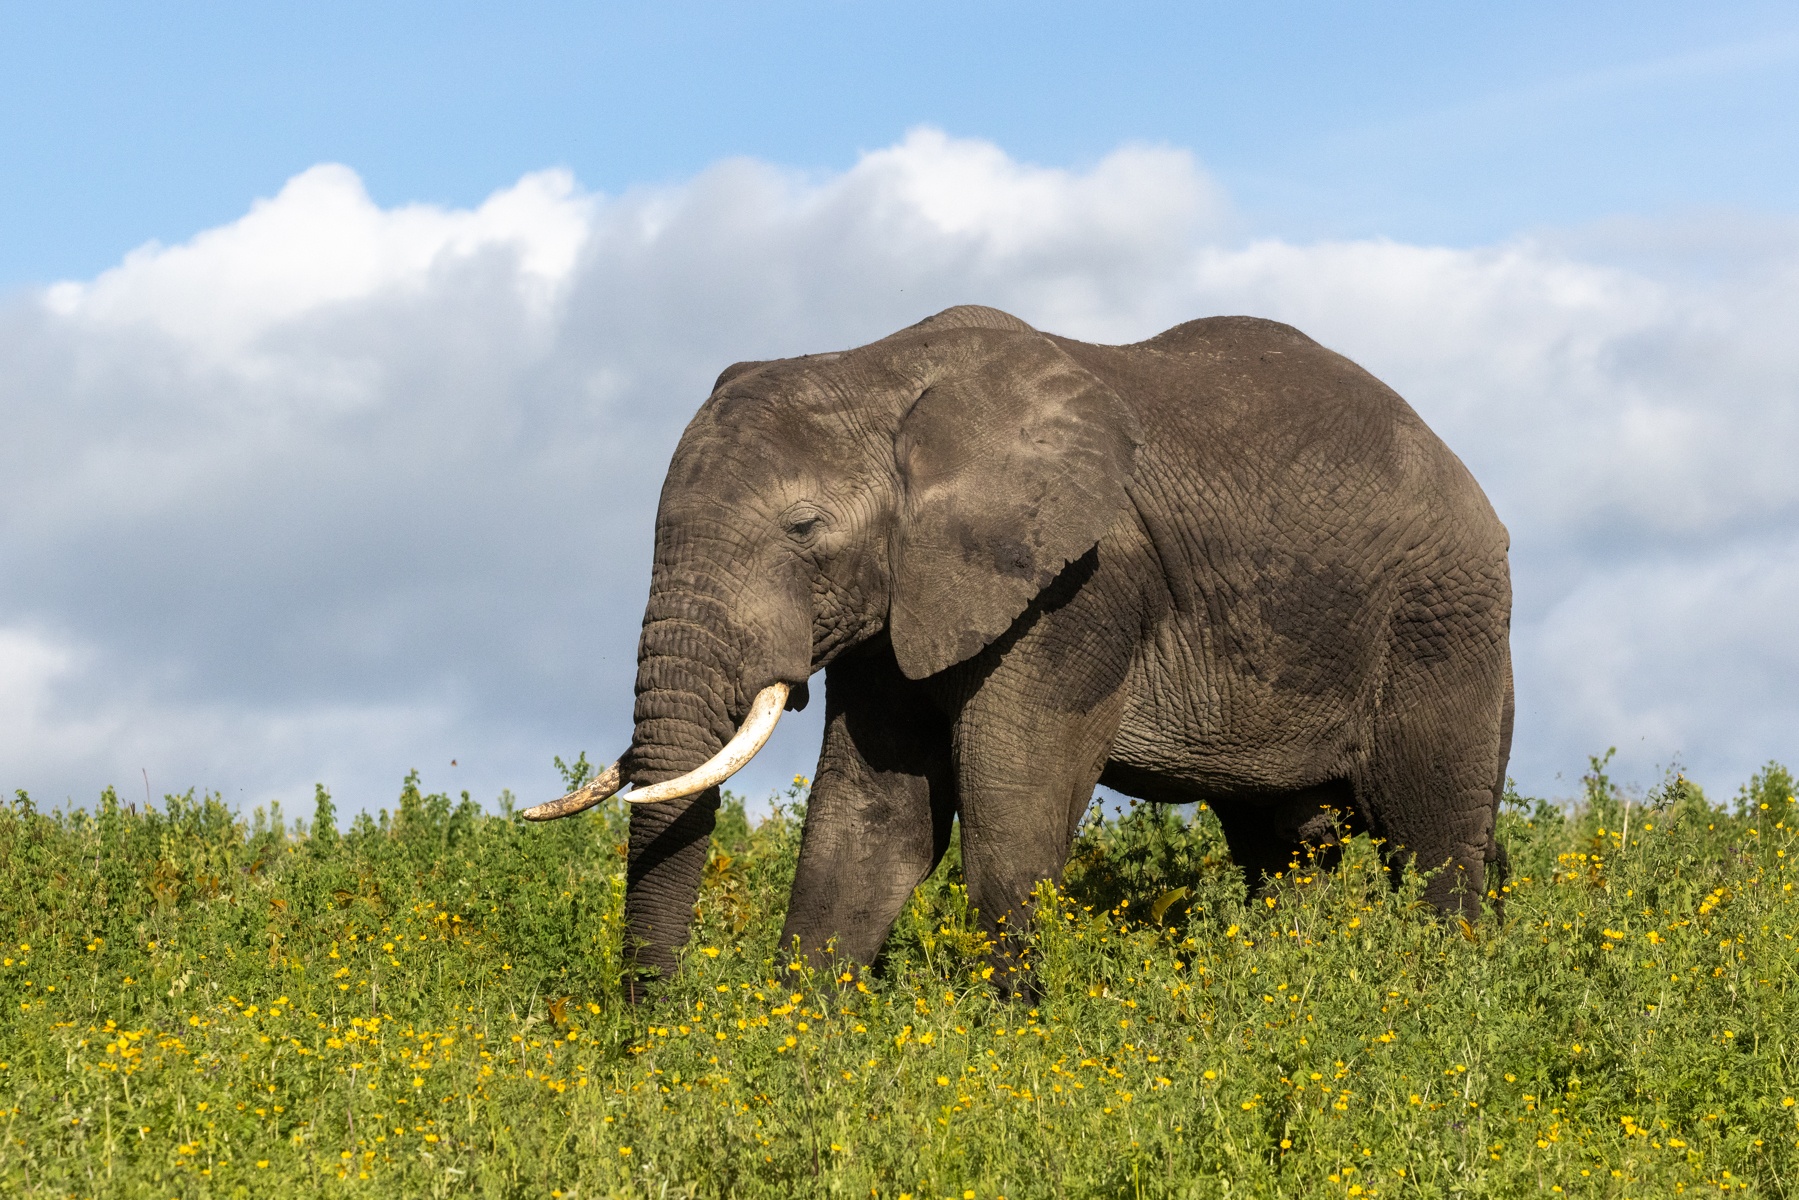 A wandering elephant enjoys the sunshine and grazing in a sea of wildlfowers at Ngorongoro